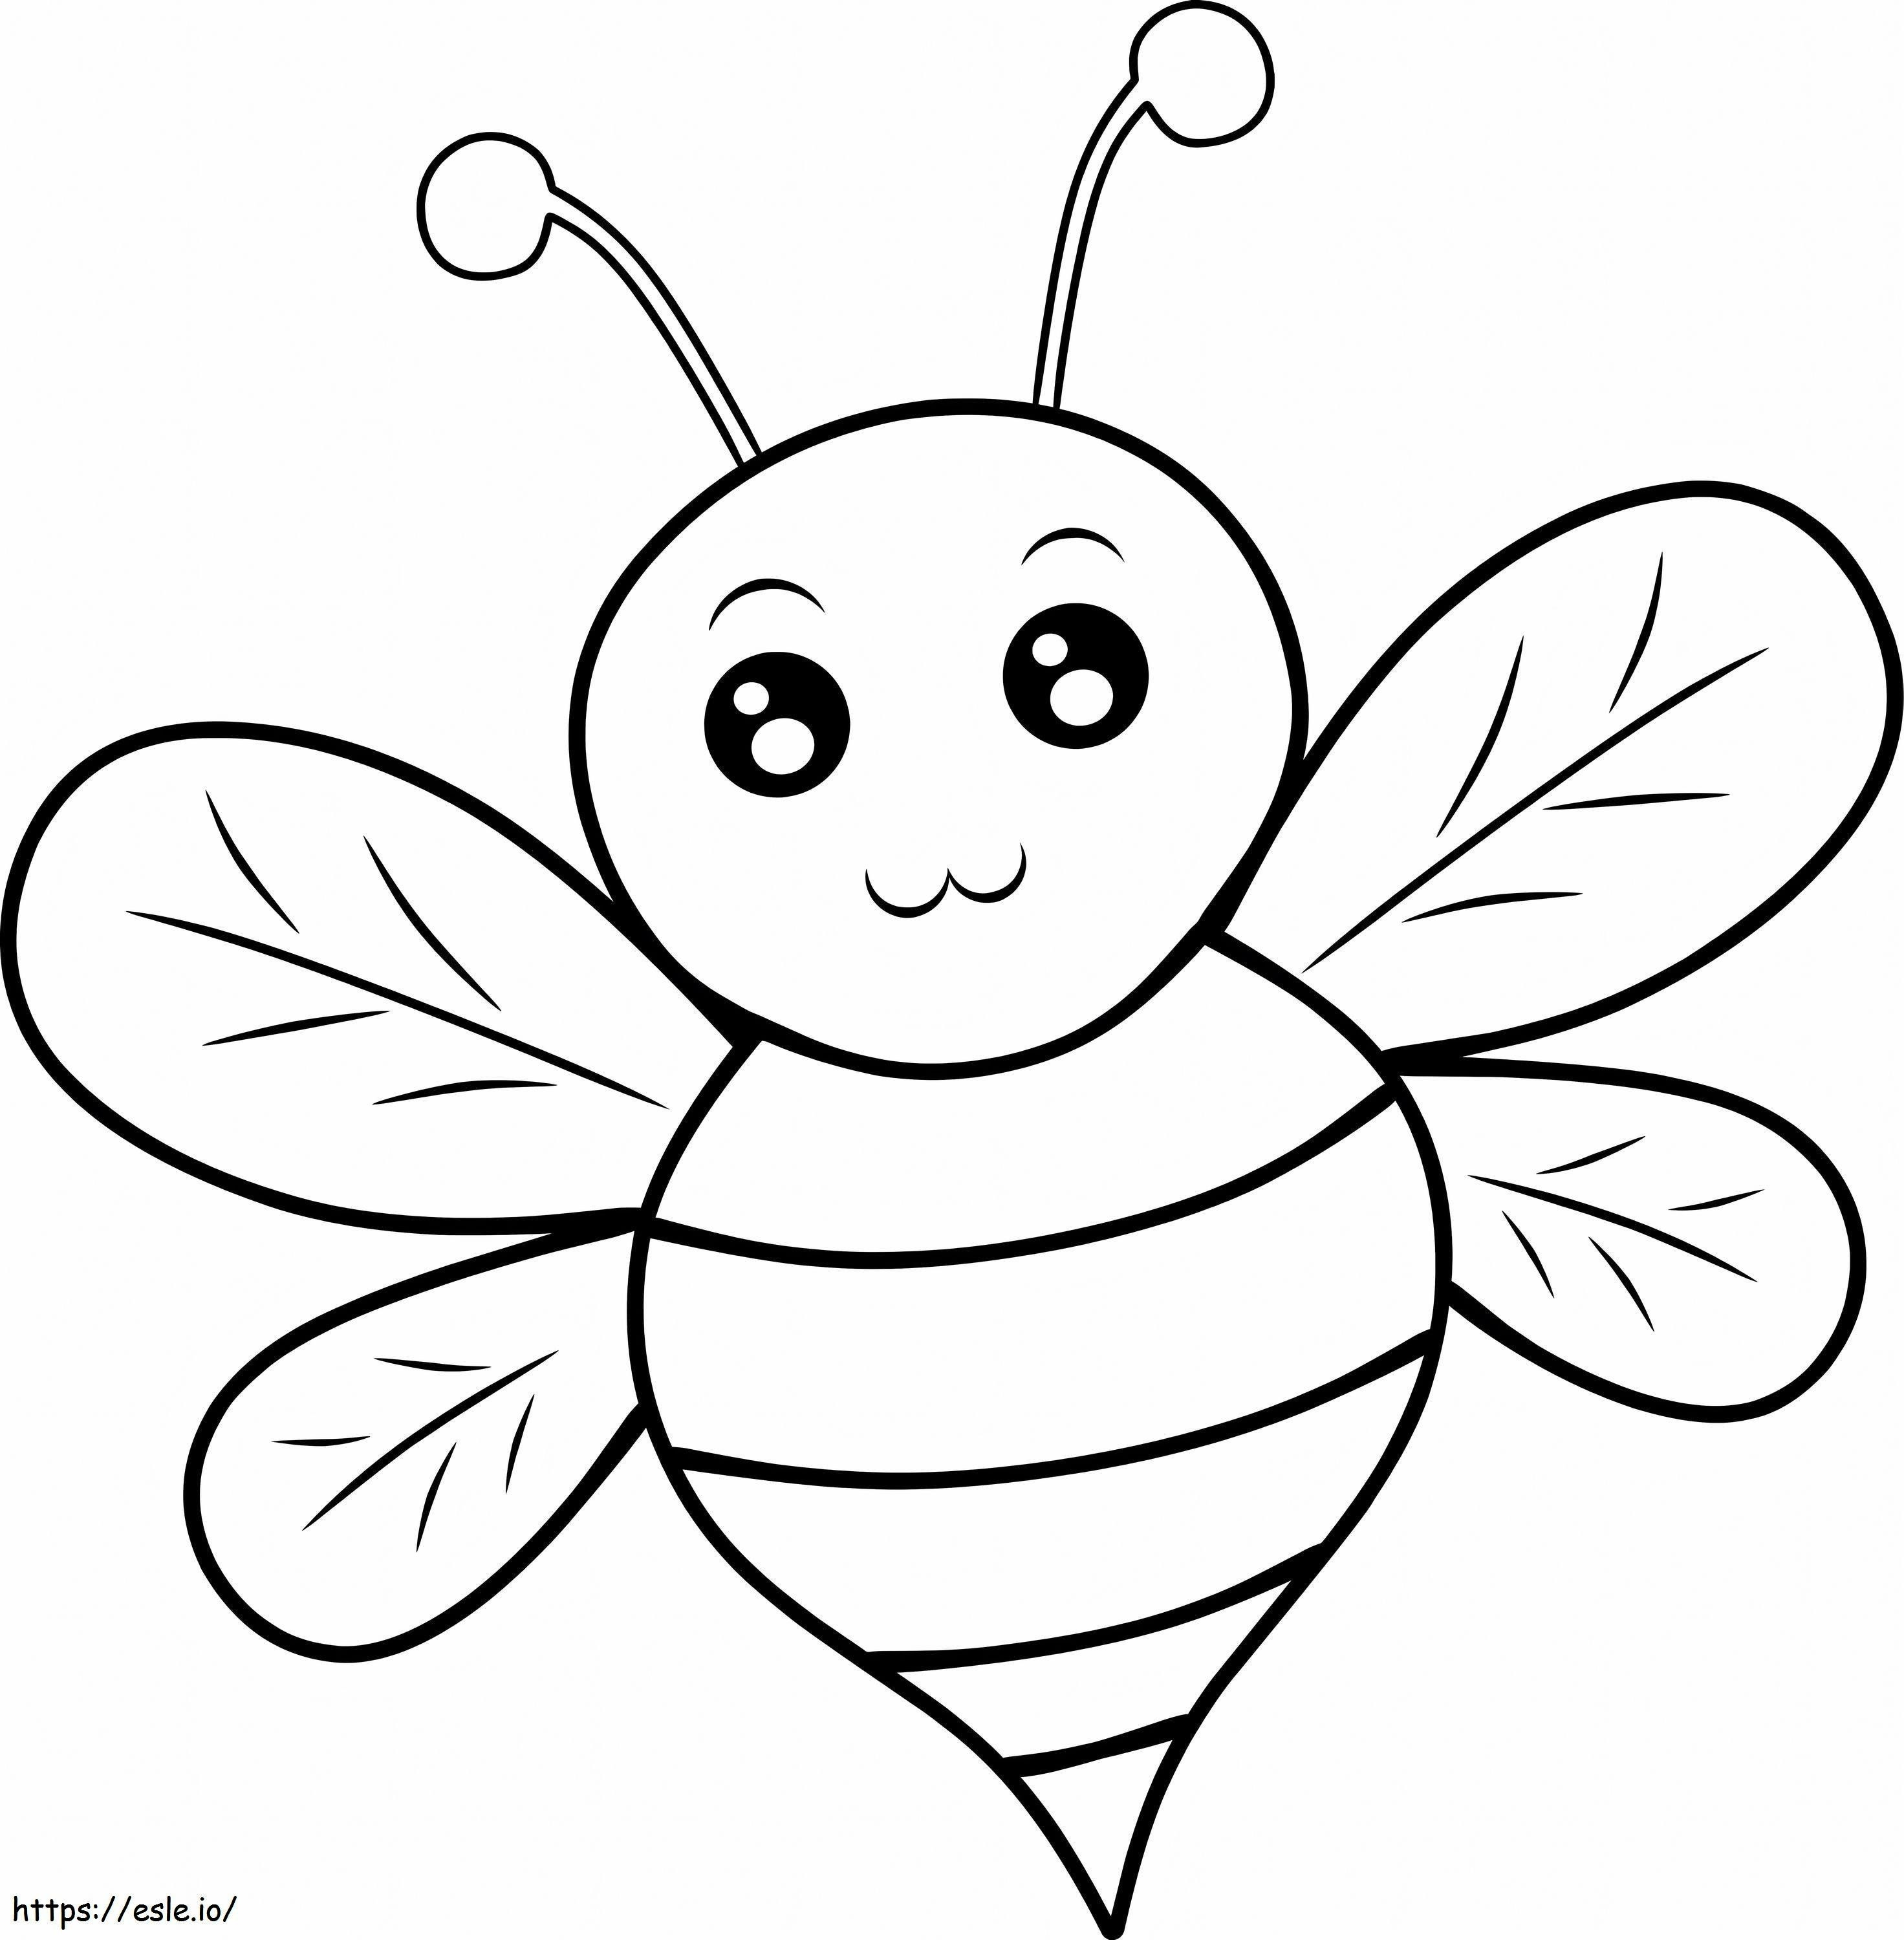 Simple Bee coloring page